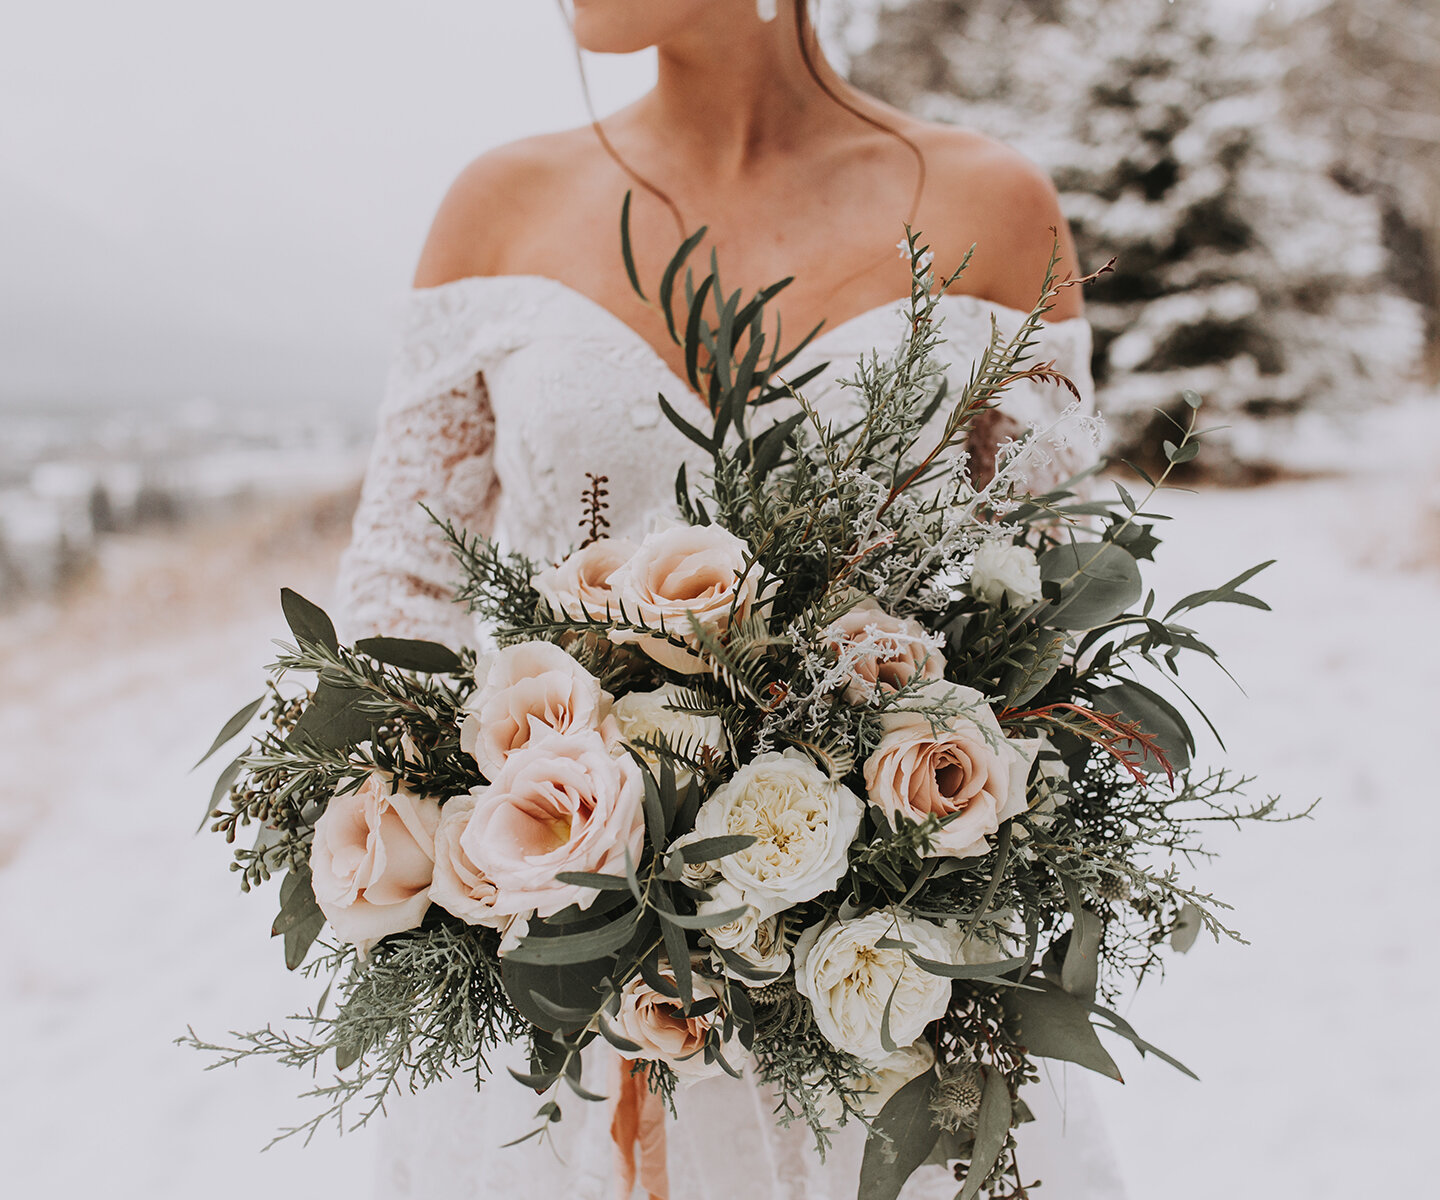 Bridal Bouquet Inspiration for Winter: 16 of the Prettiest Bouquets For Every Winter Wedding Style